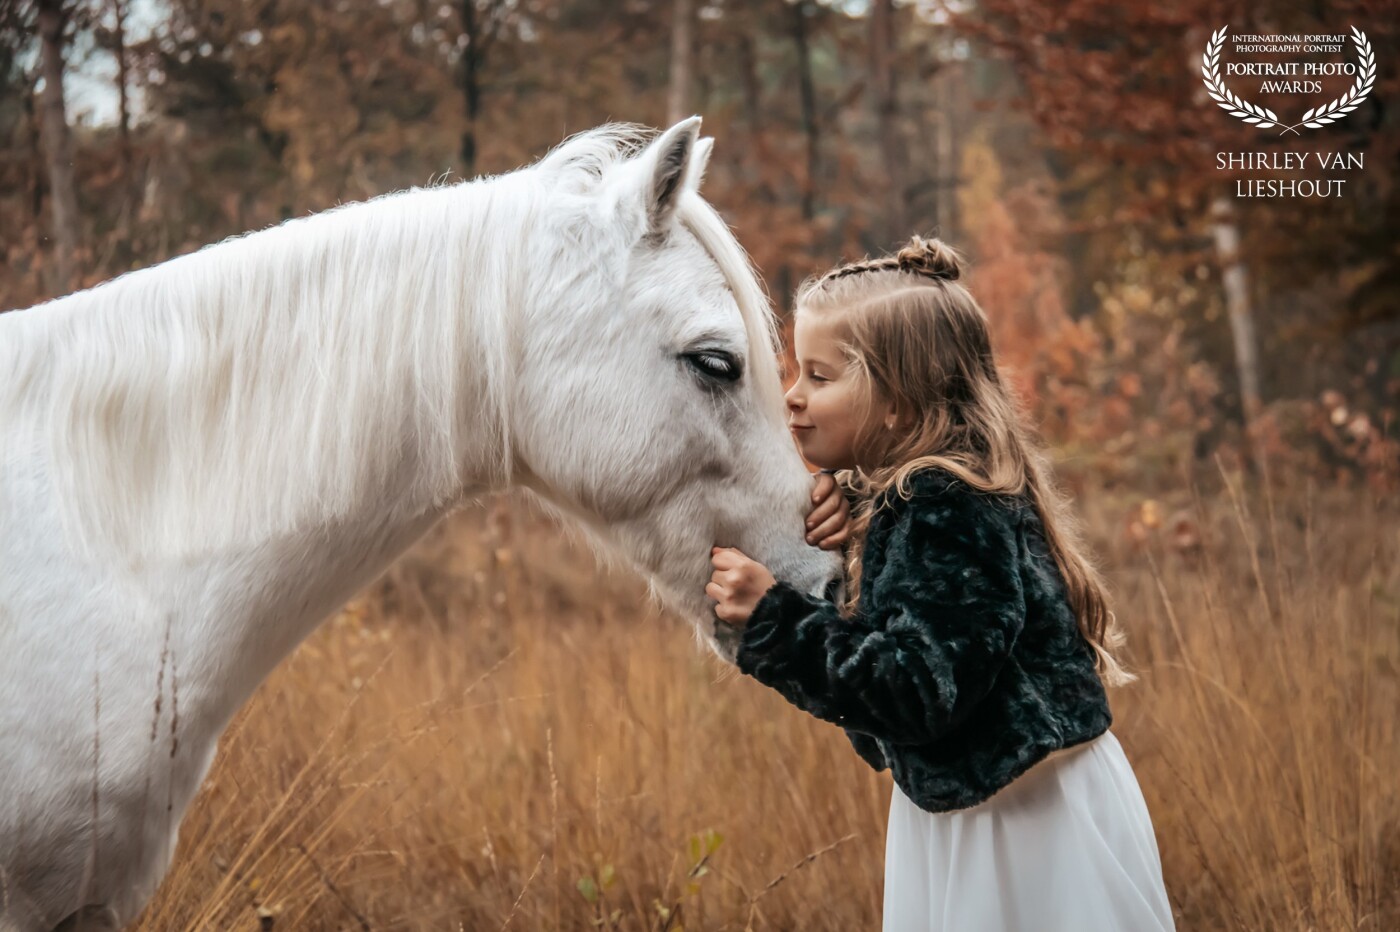 Lovely Valente with her sweet Welsh pony Sunny. You can see the bond and love they have for each other. A friendship for a lifetime!